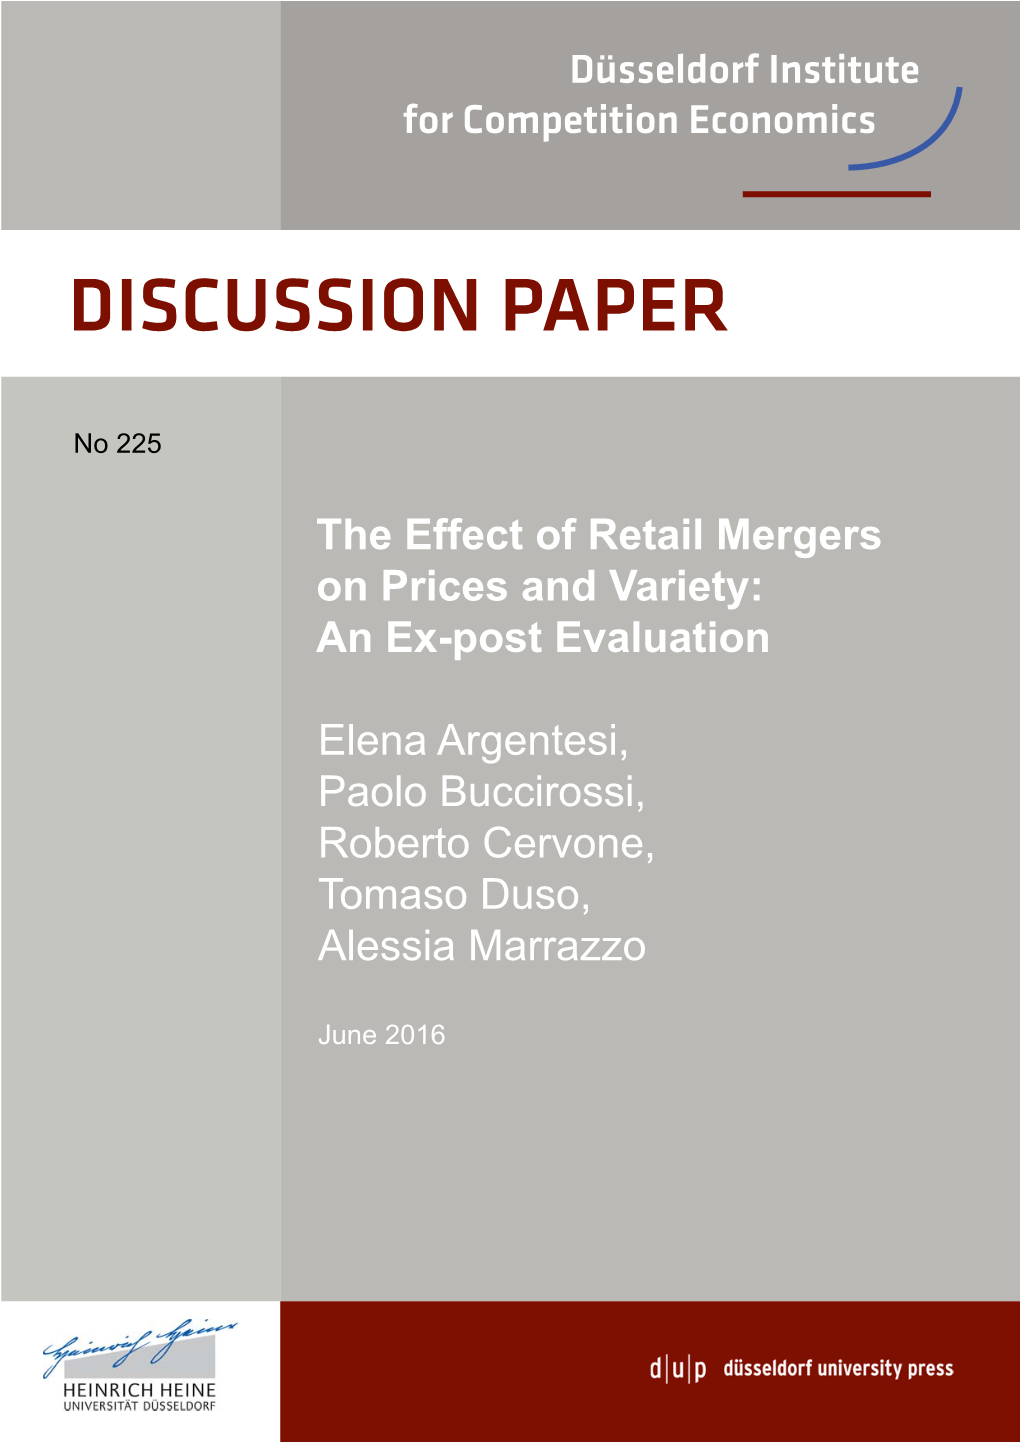 The Effect of Retail Mergers on Prices and Variety: an Ex-Post Evaluation Elena Argentesi, Paolo Buccirossi, Roberto Cervone